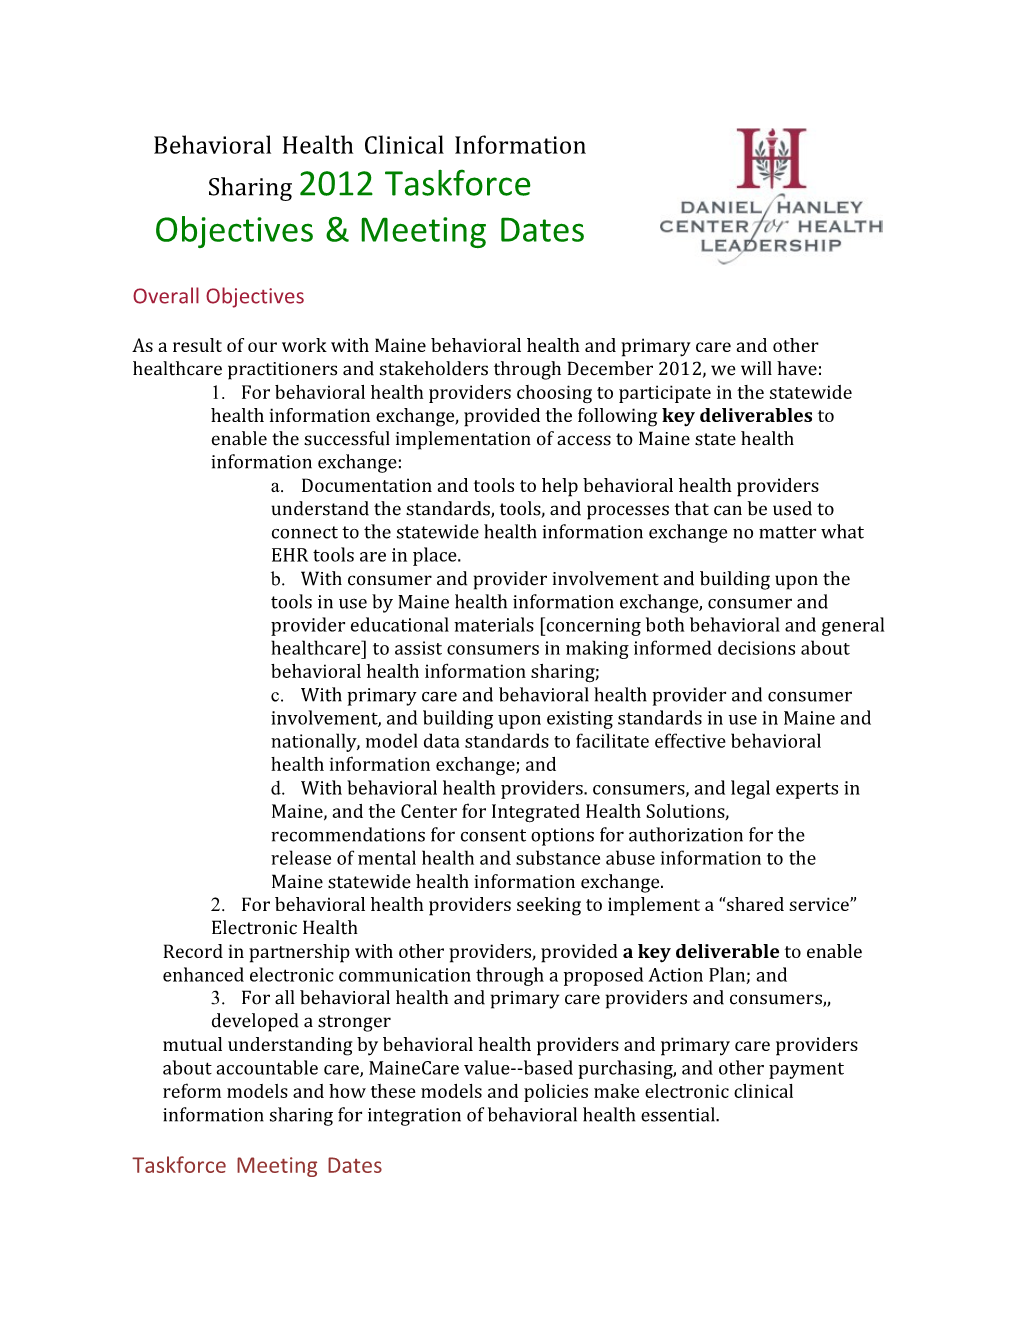 Behavioral Health Clinical Information Sharing 2012 Taskforce Objectives Meeting Dates